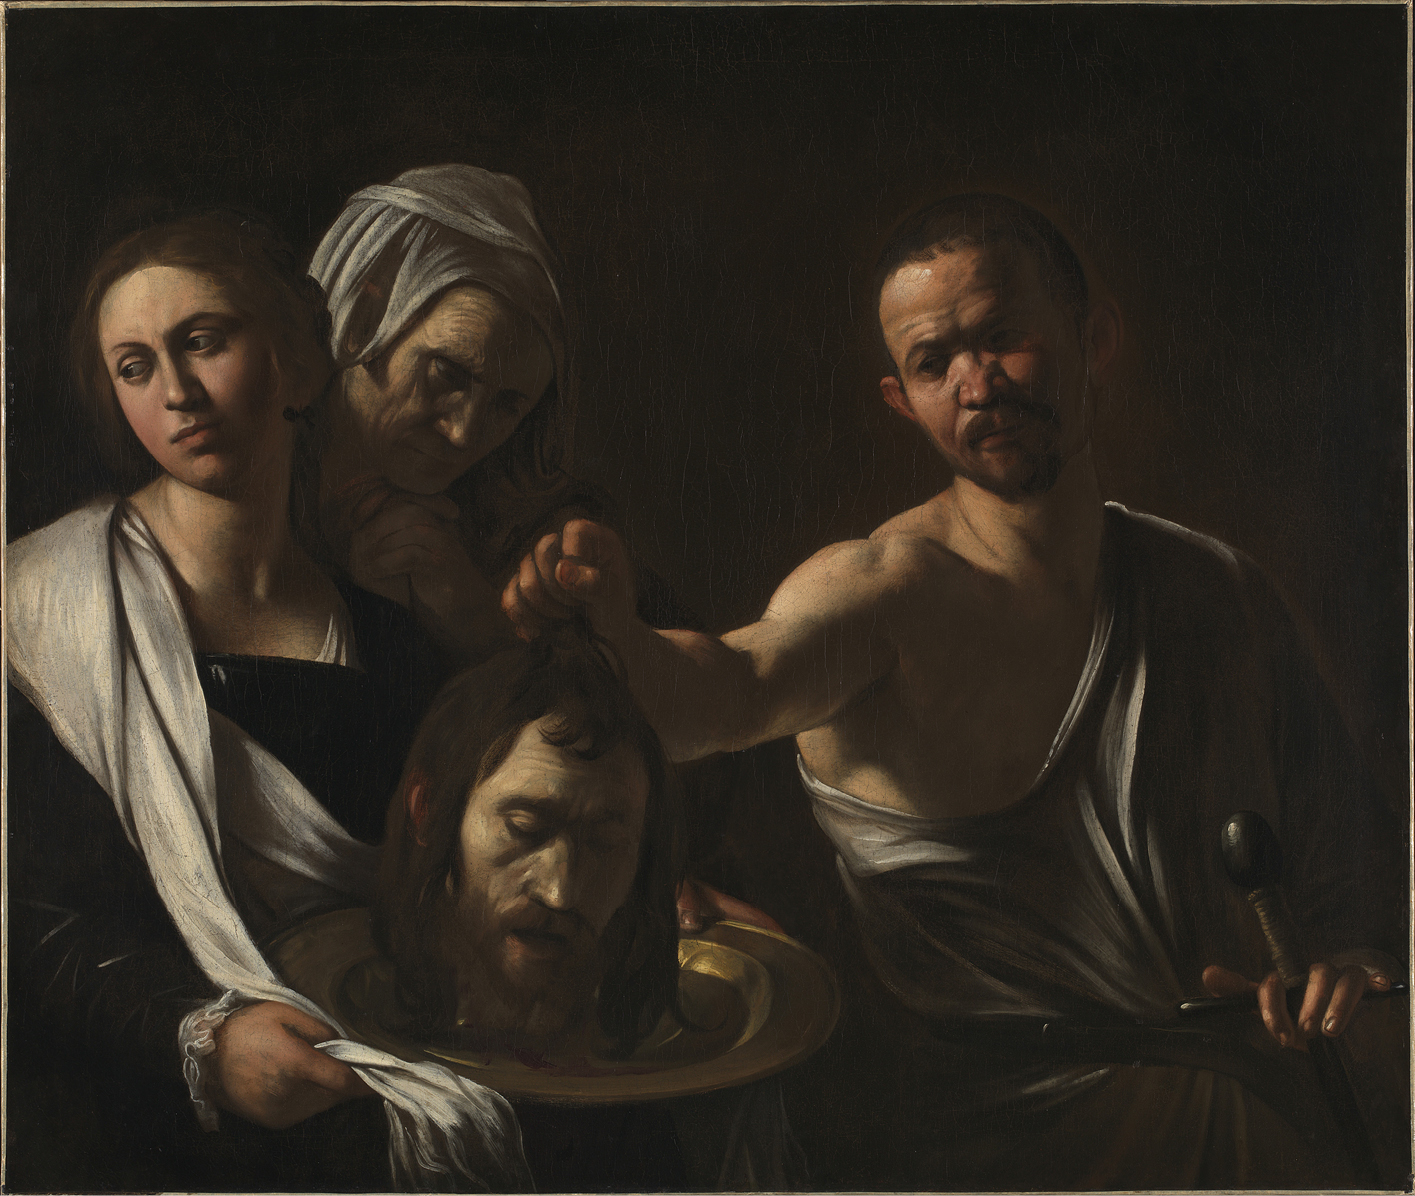 Caravaggio’s Salome with the Head of John the Baptist